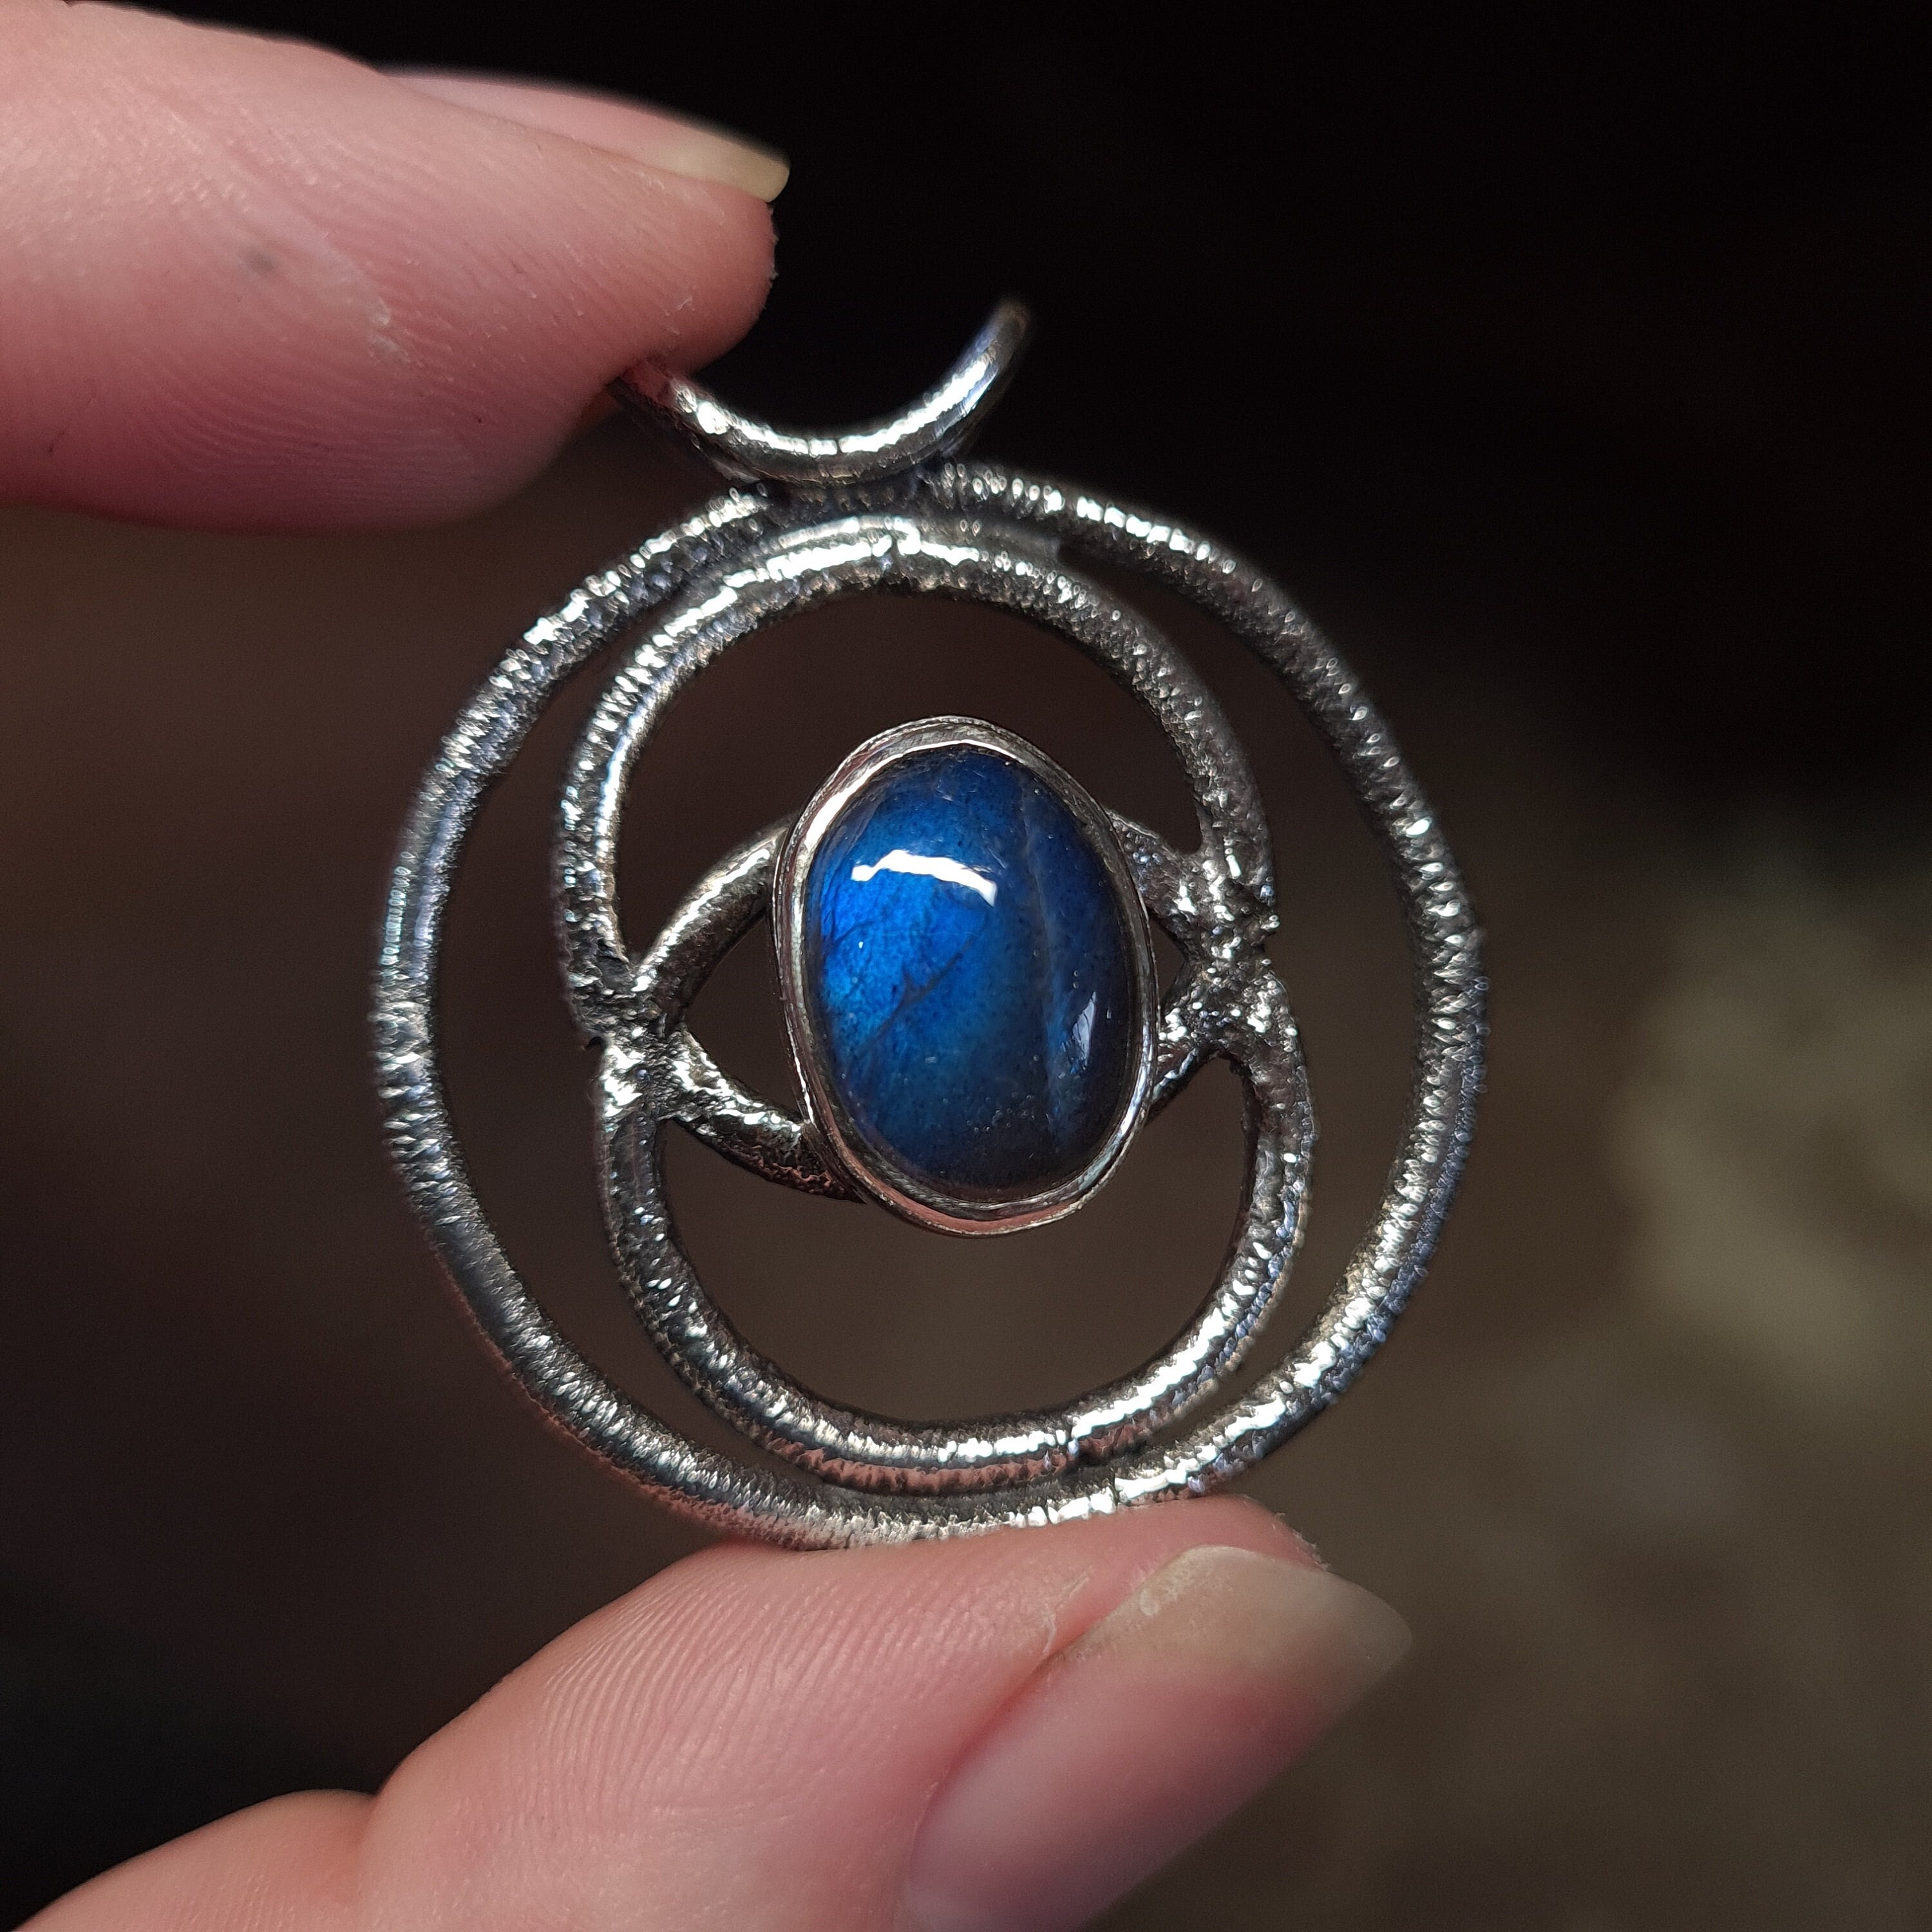 Eye of Elena necklace | Throne of glass books, Throne of glass, Throne of  glass series